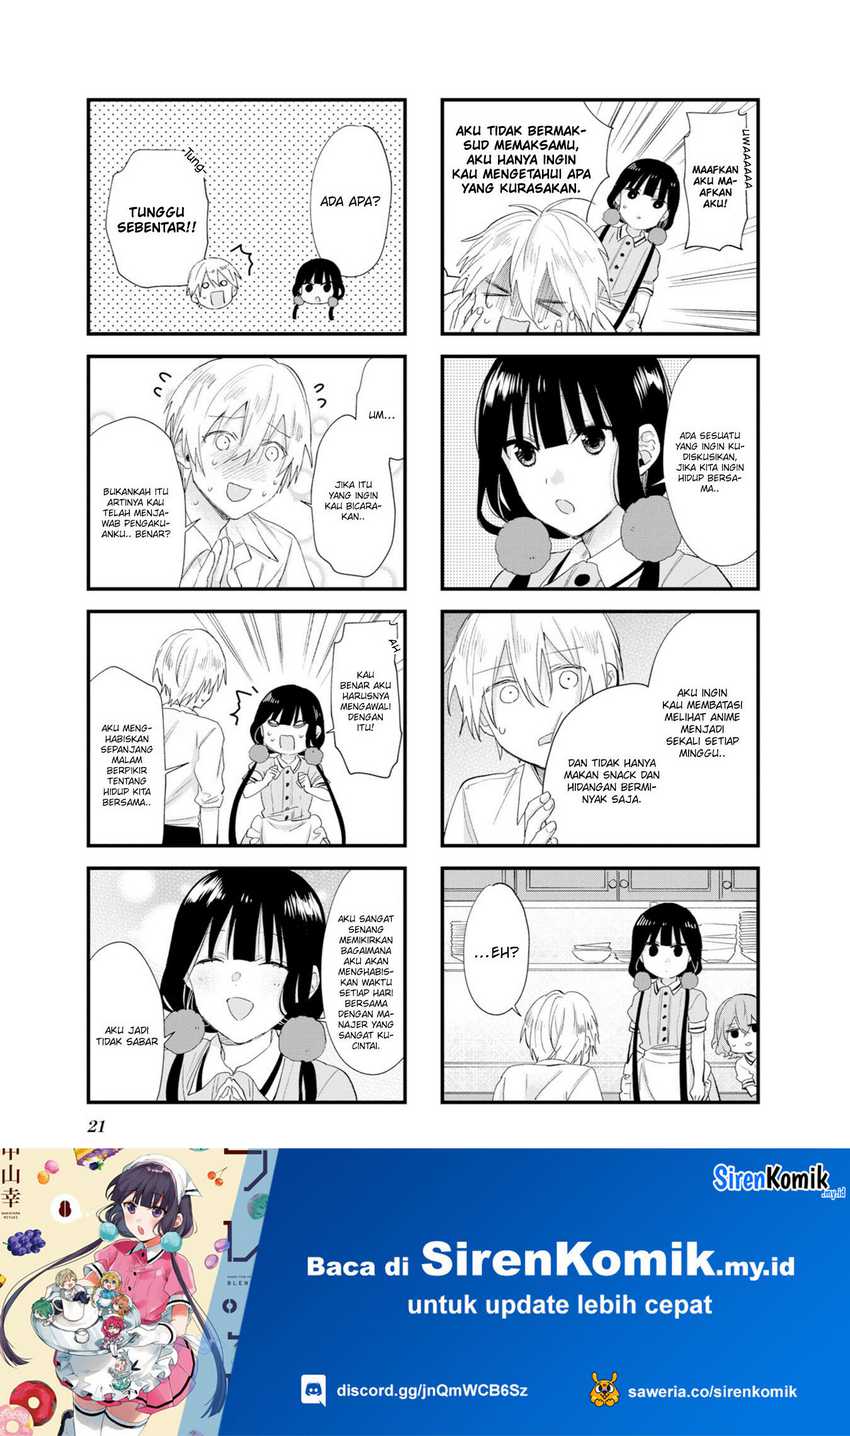 Blend S Chapter 101